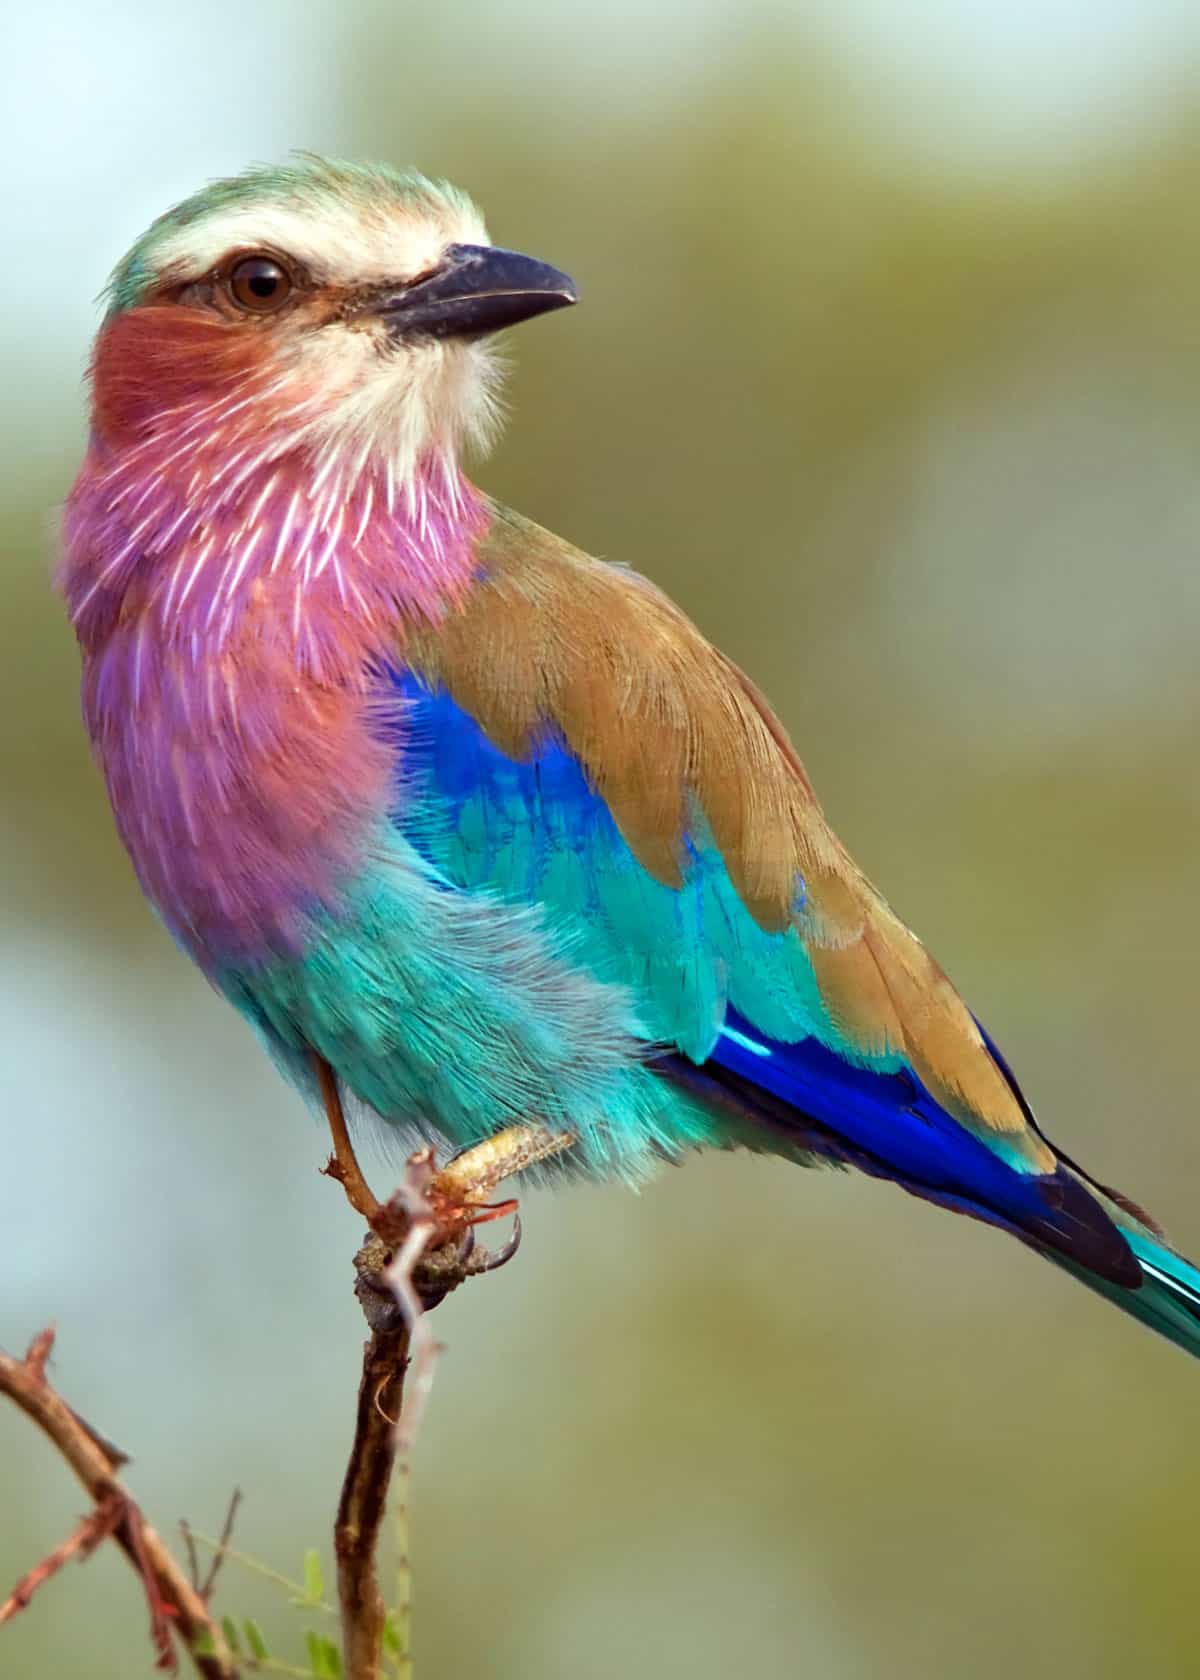 35 Most Colorful Animals in the World (Mammals, Birds, Insects, Reptiles) | Everywhere Wild